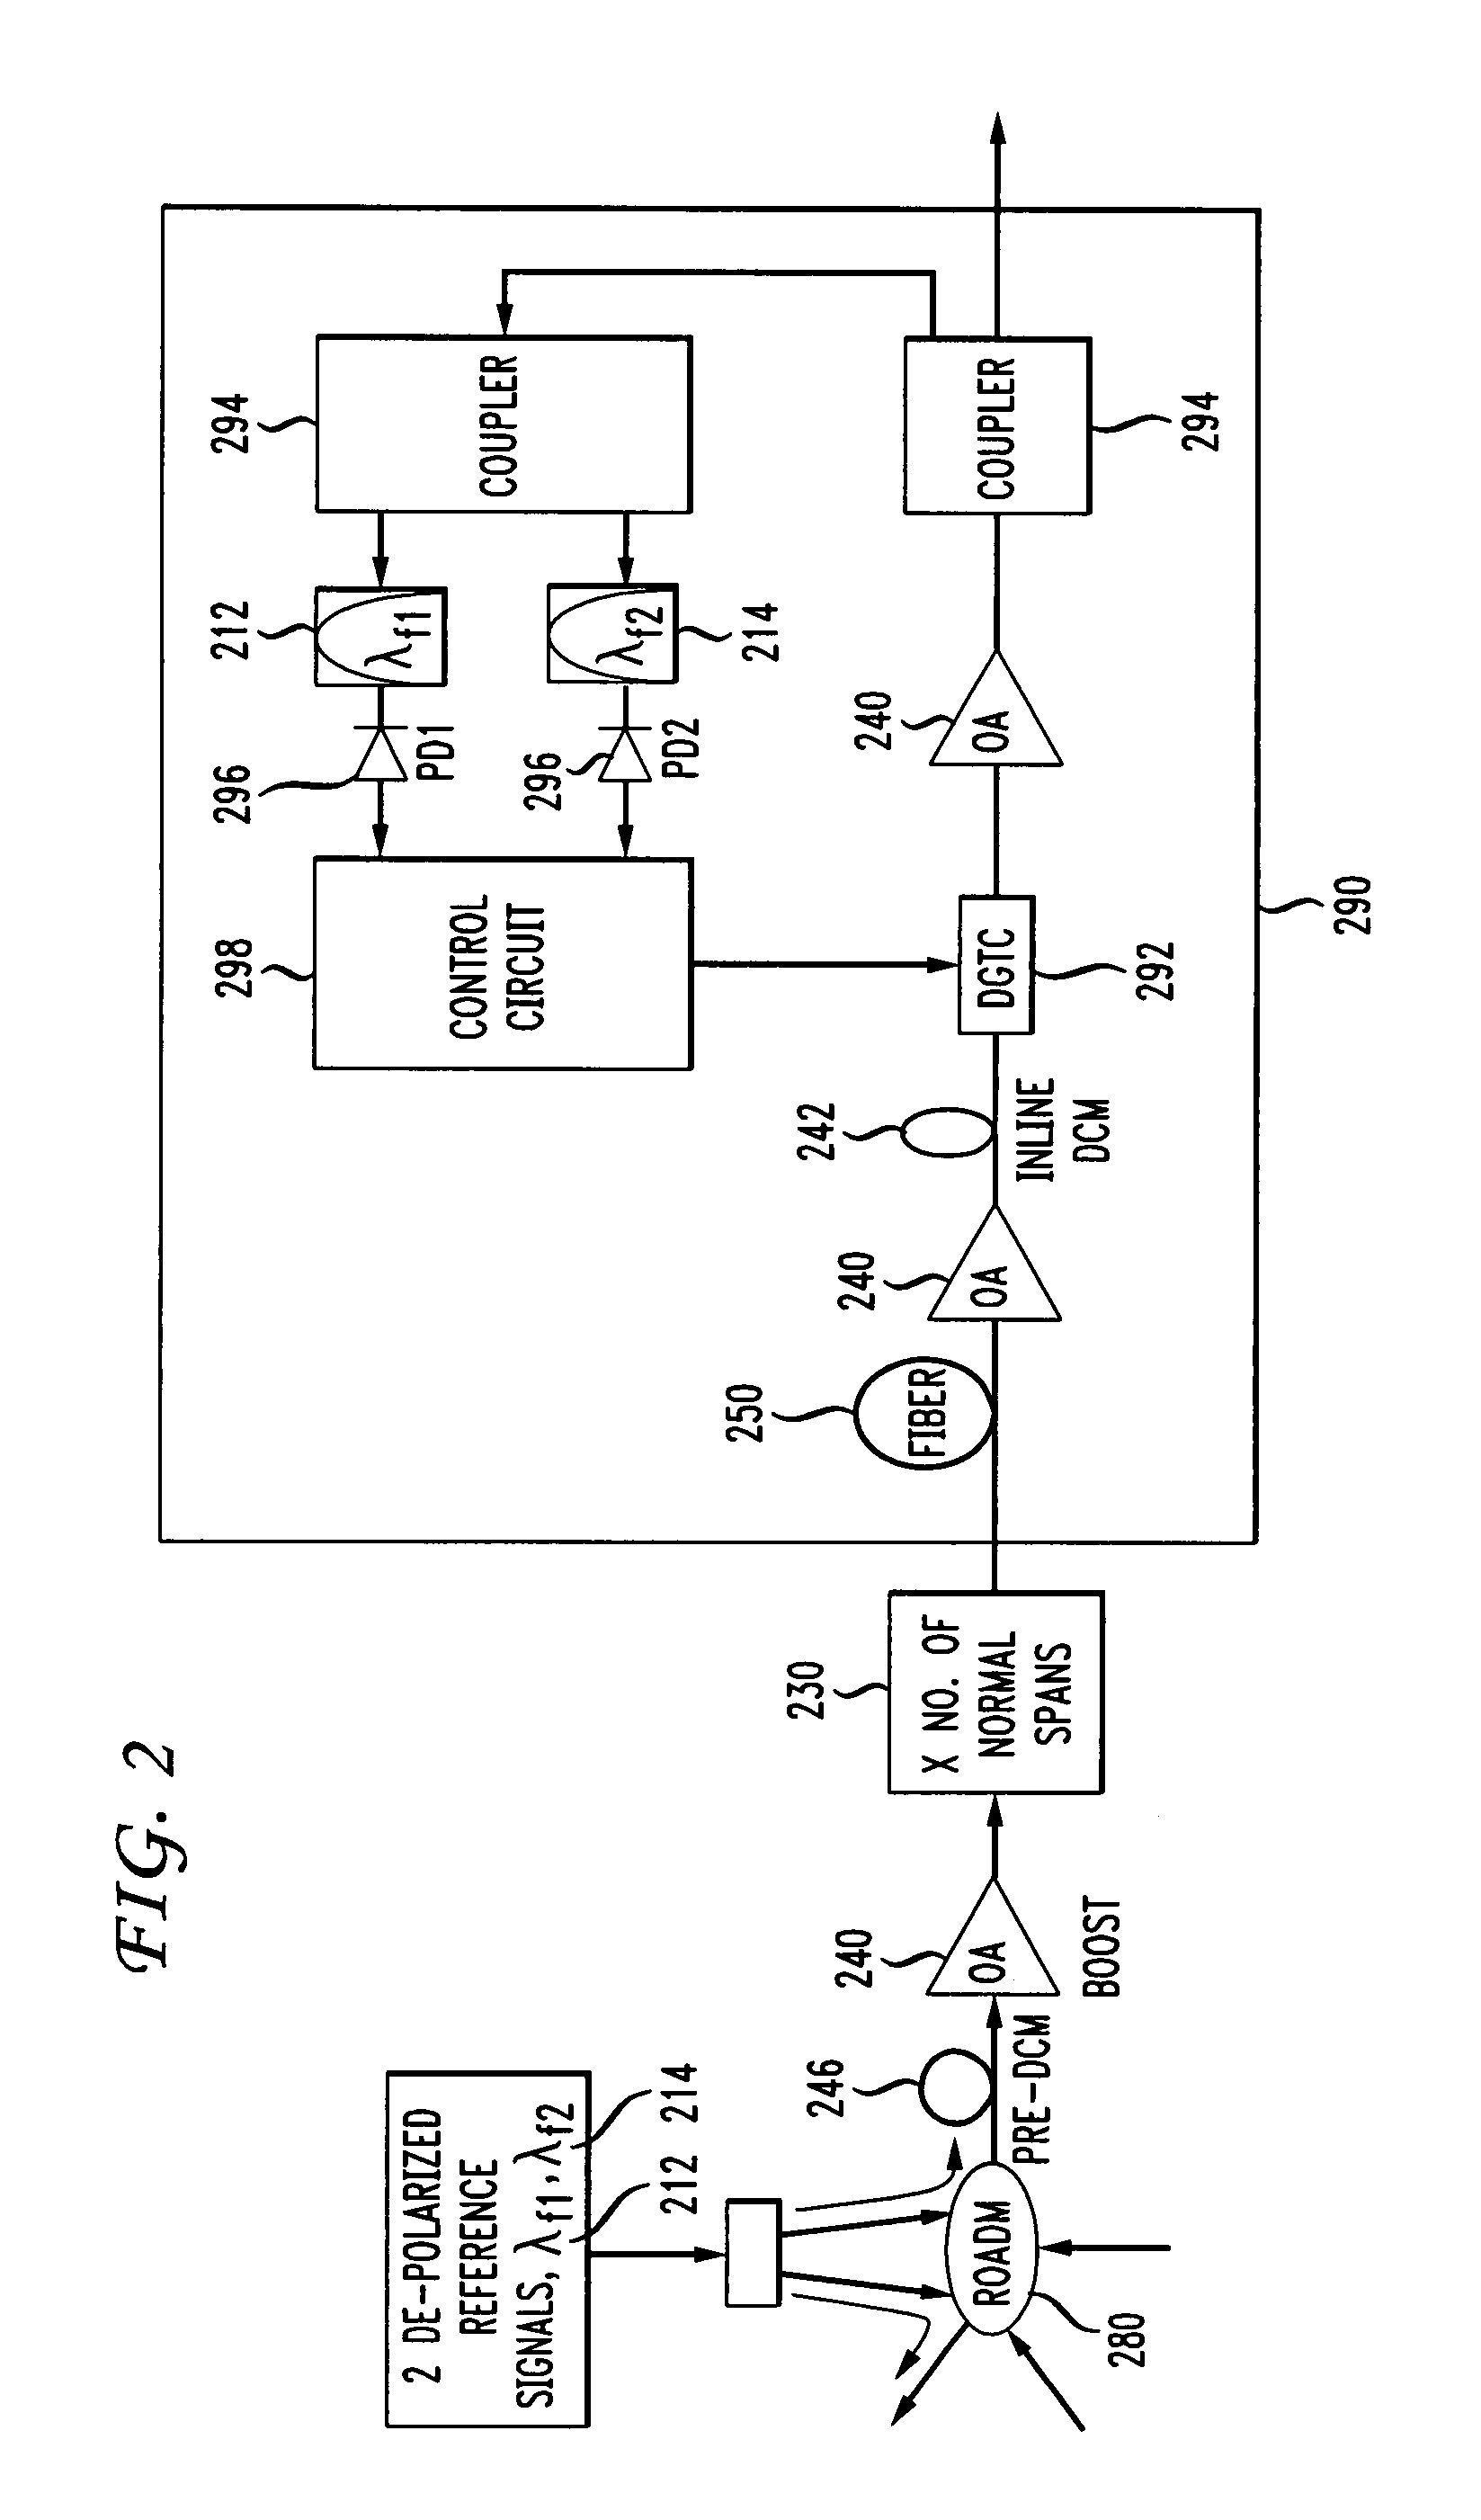 Method and apparatus for adjusting for polarization-induced, optical signal transients